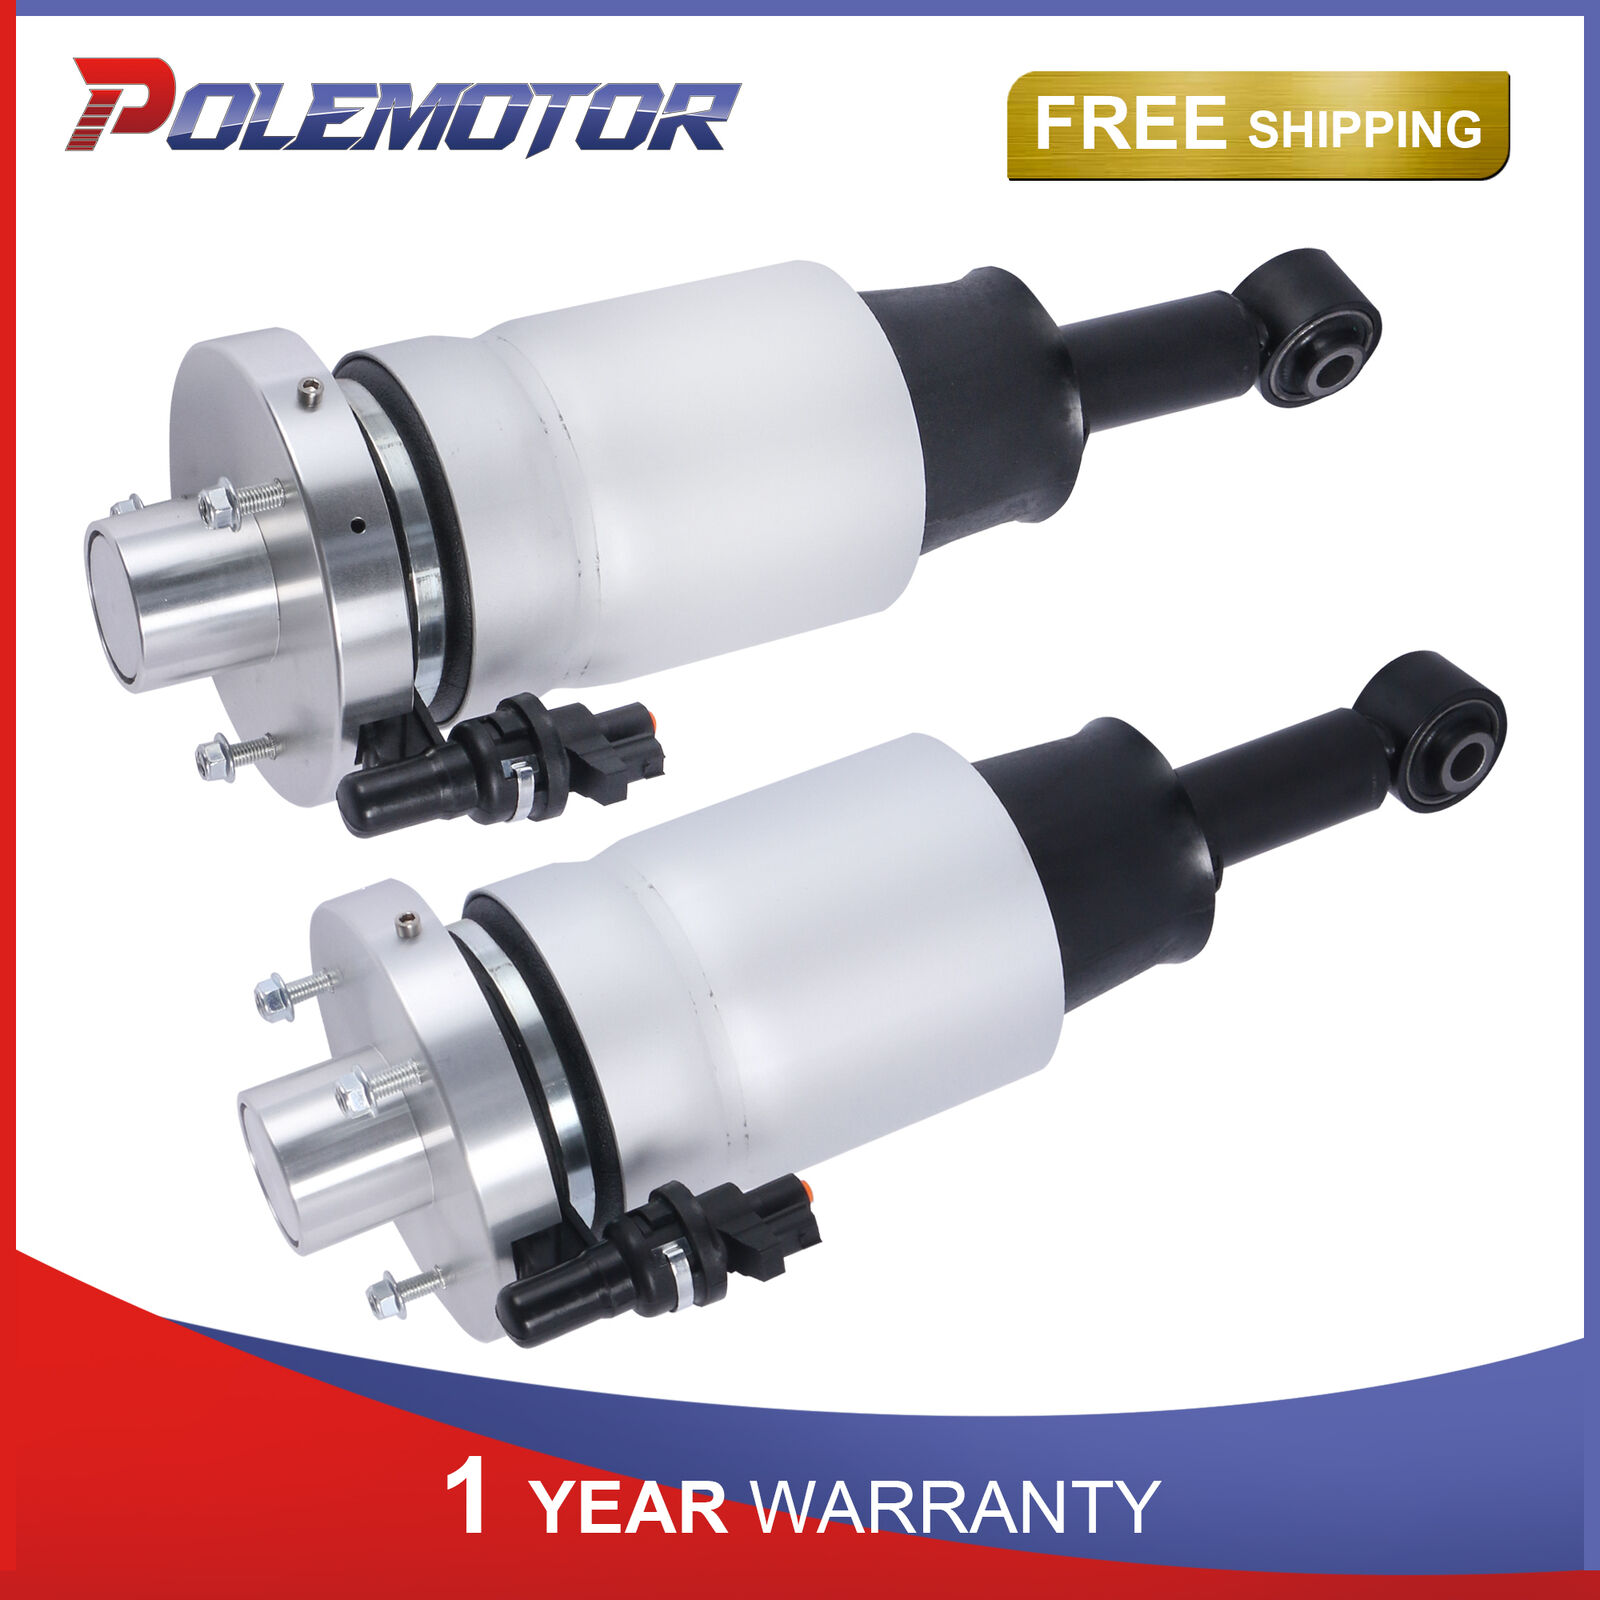 Rear Side Air Suspension Struts Shocks For Lincoln Navigator Ford Expedition 4WD